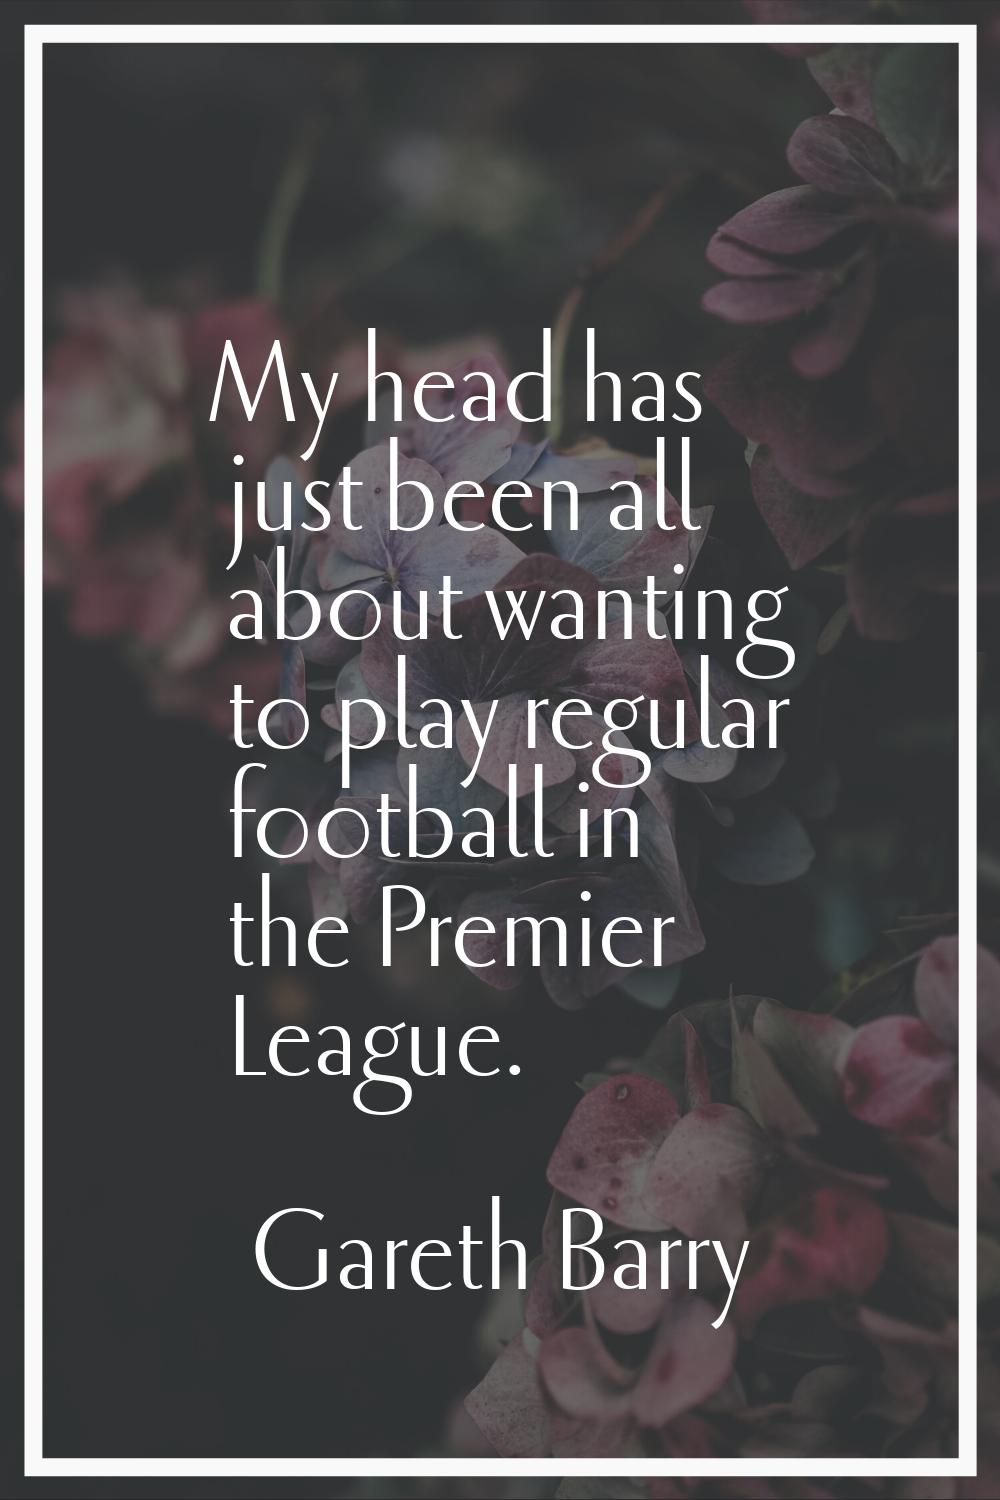 My head has just been all about wanting to play regular football in the Premier League.